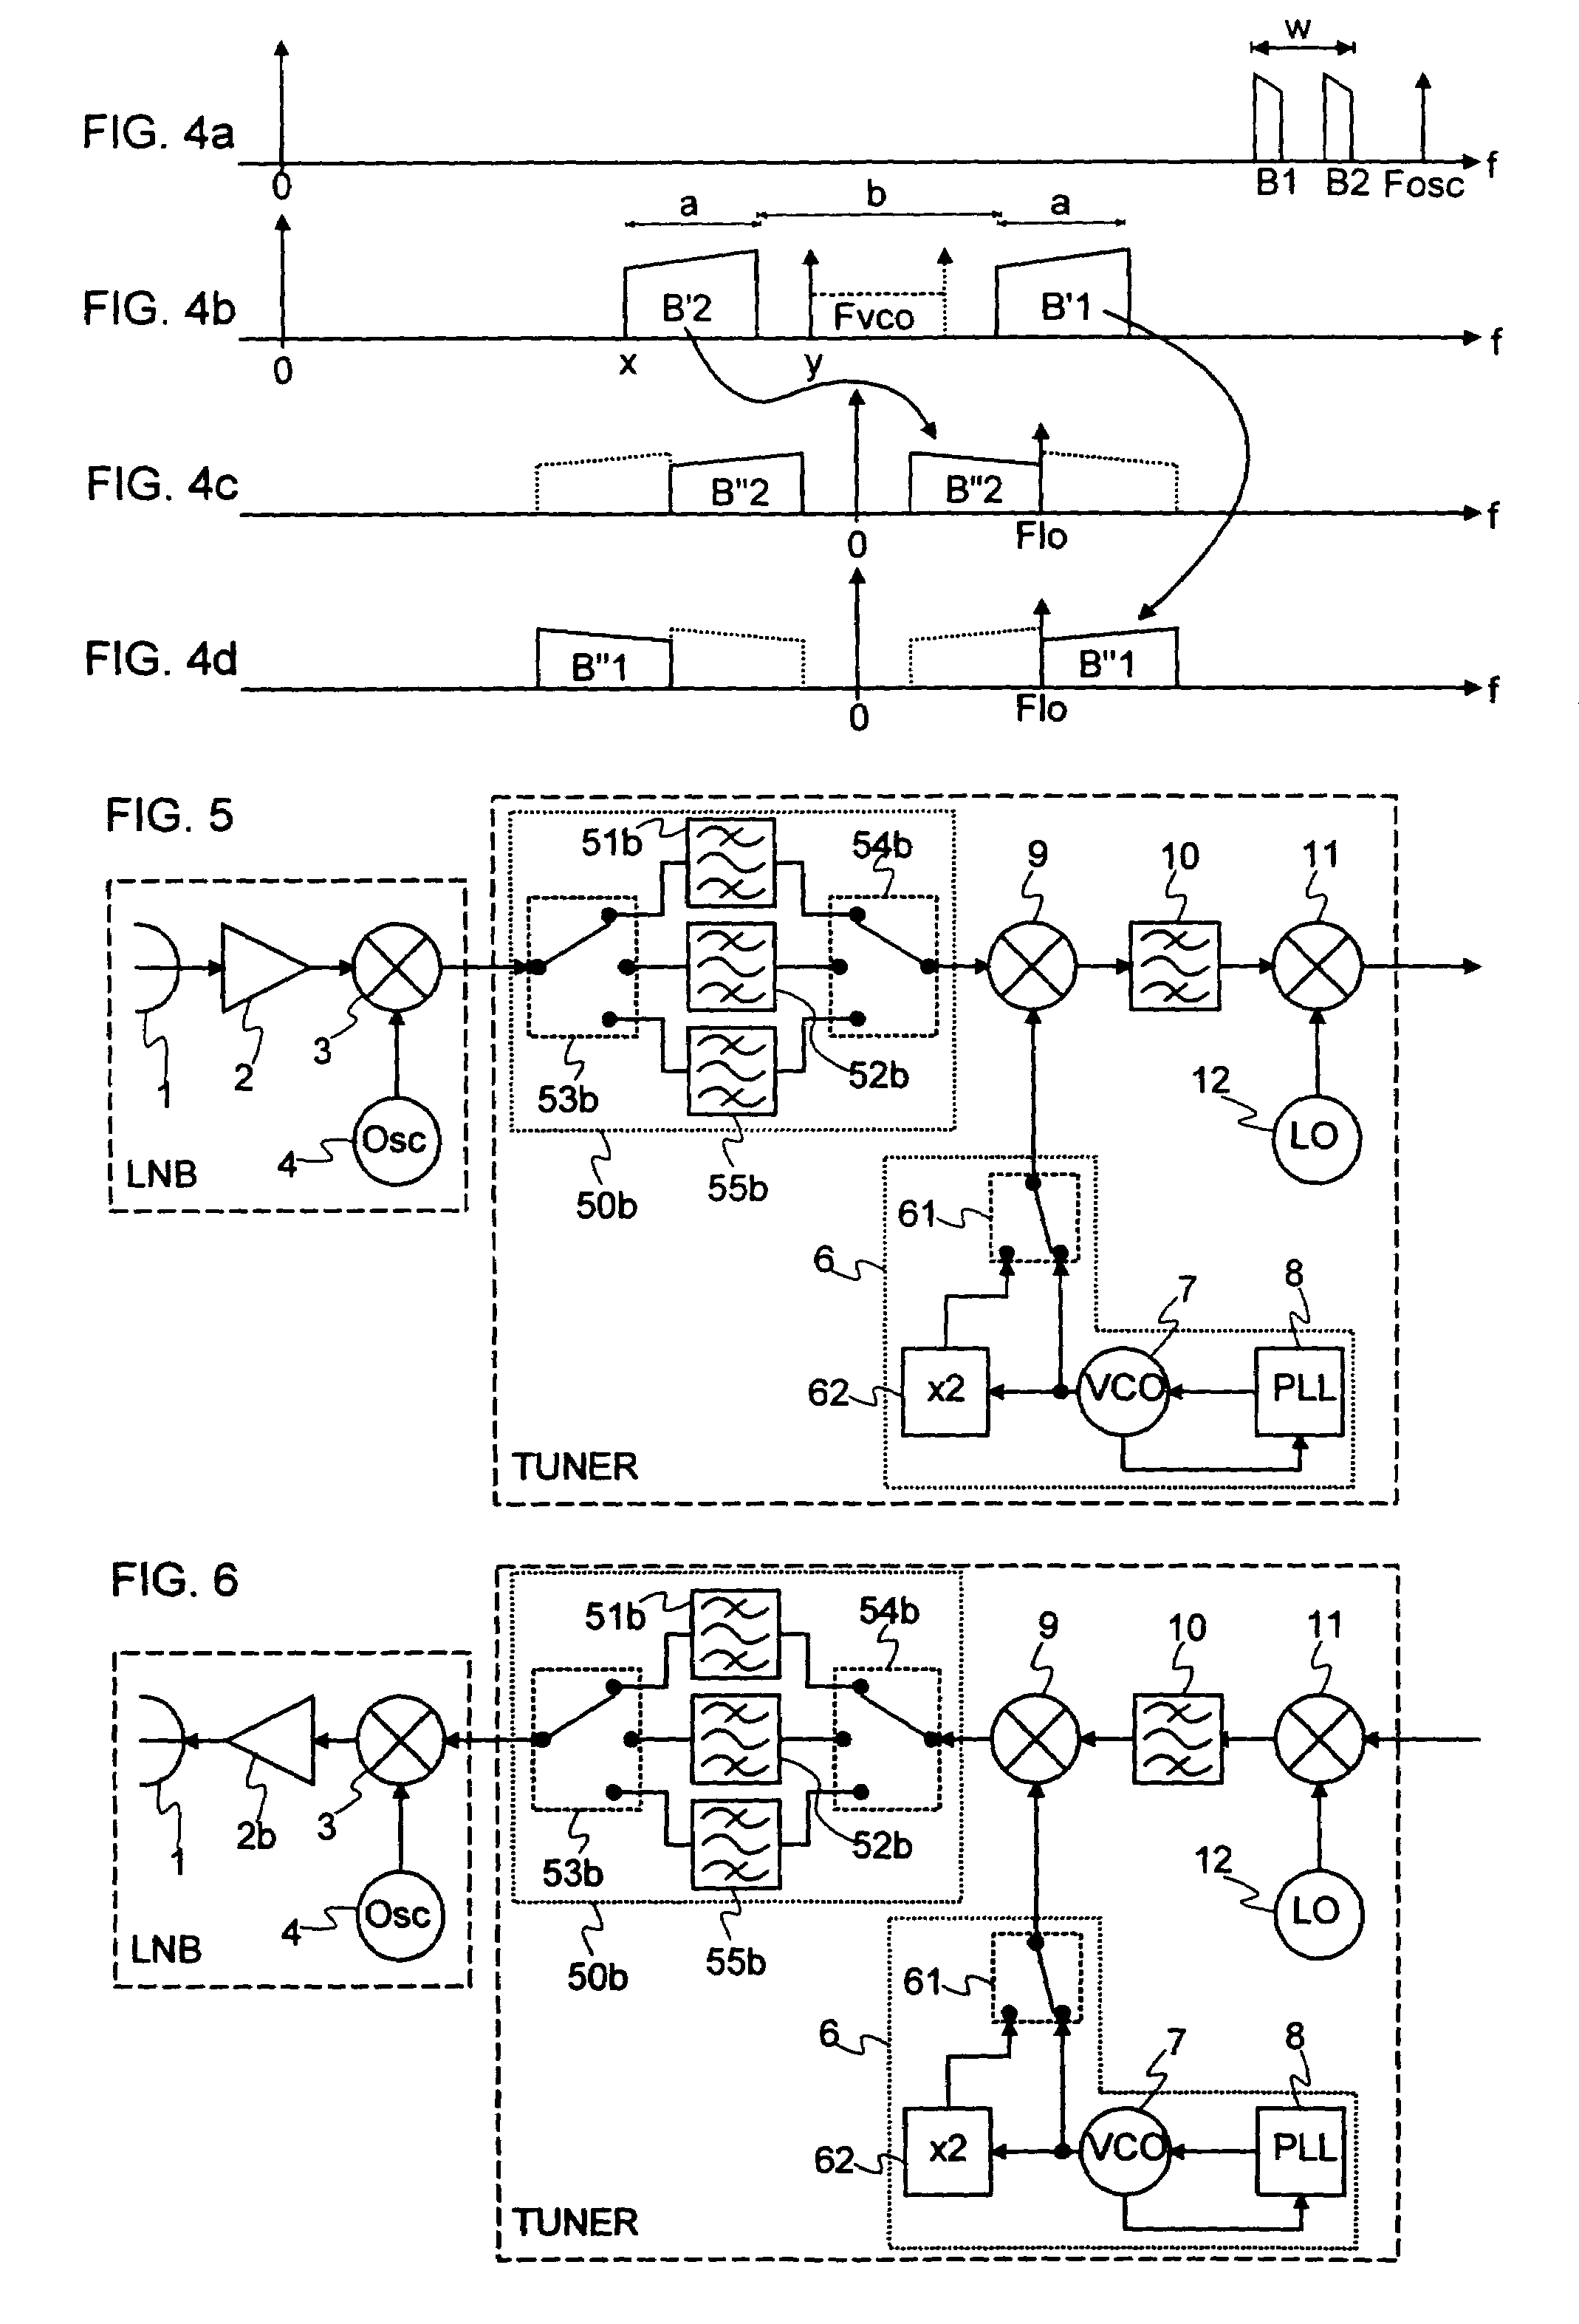 Radiofrequency transmitter and/or receiver